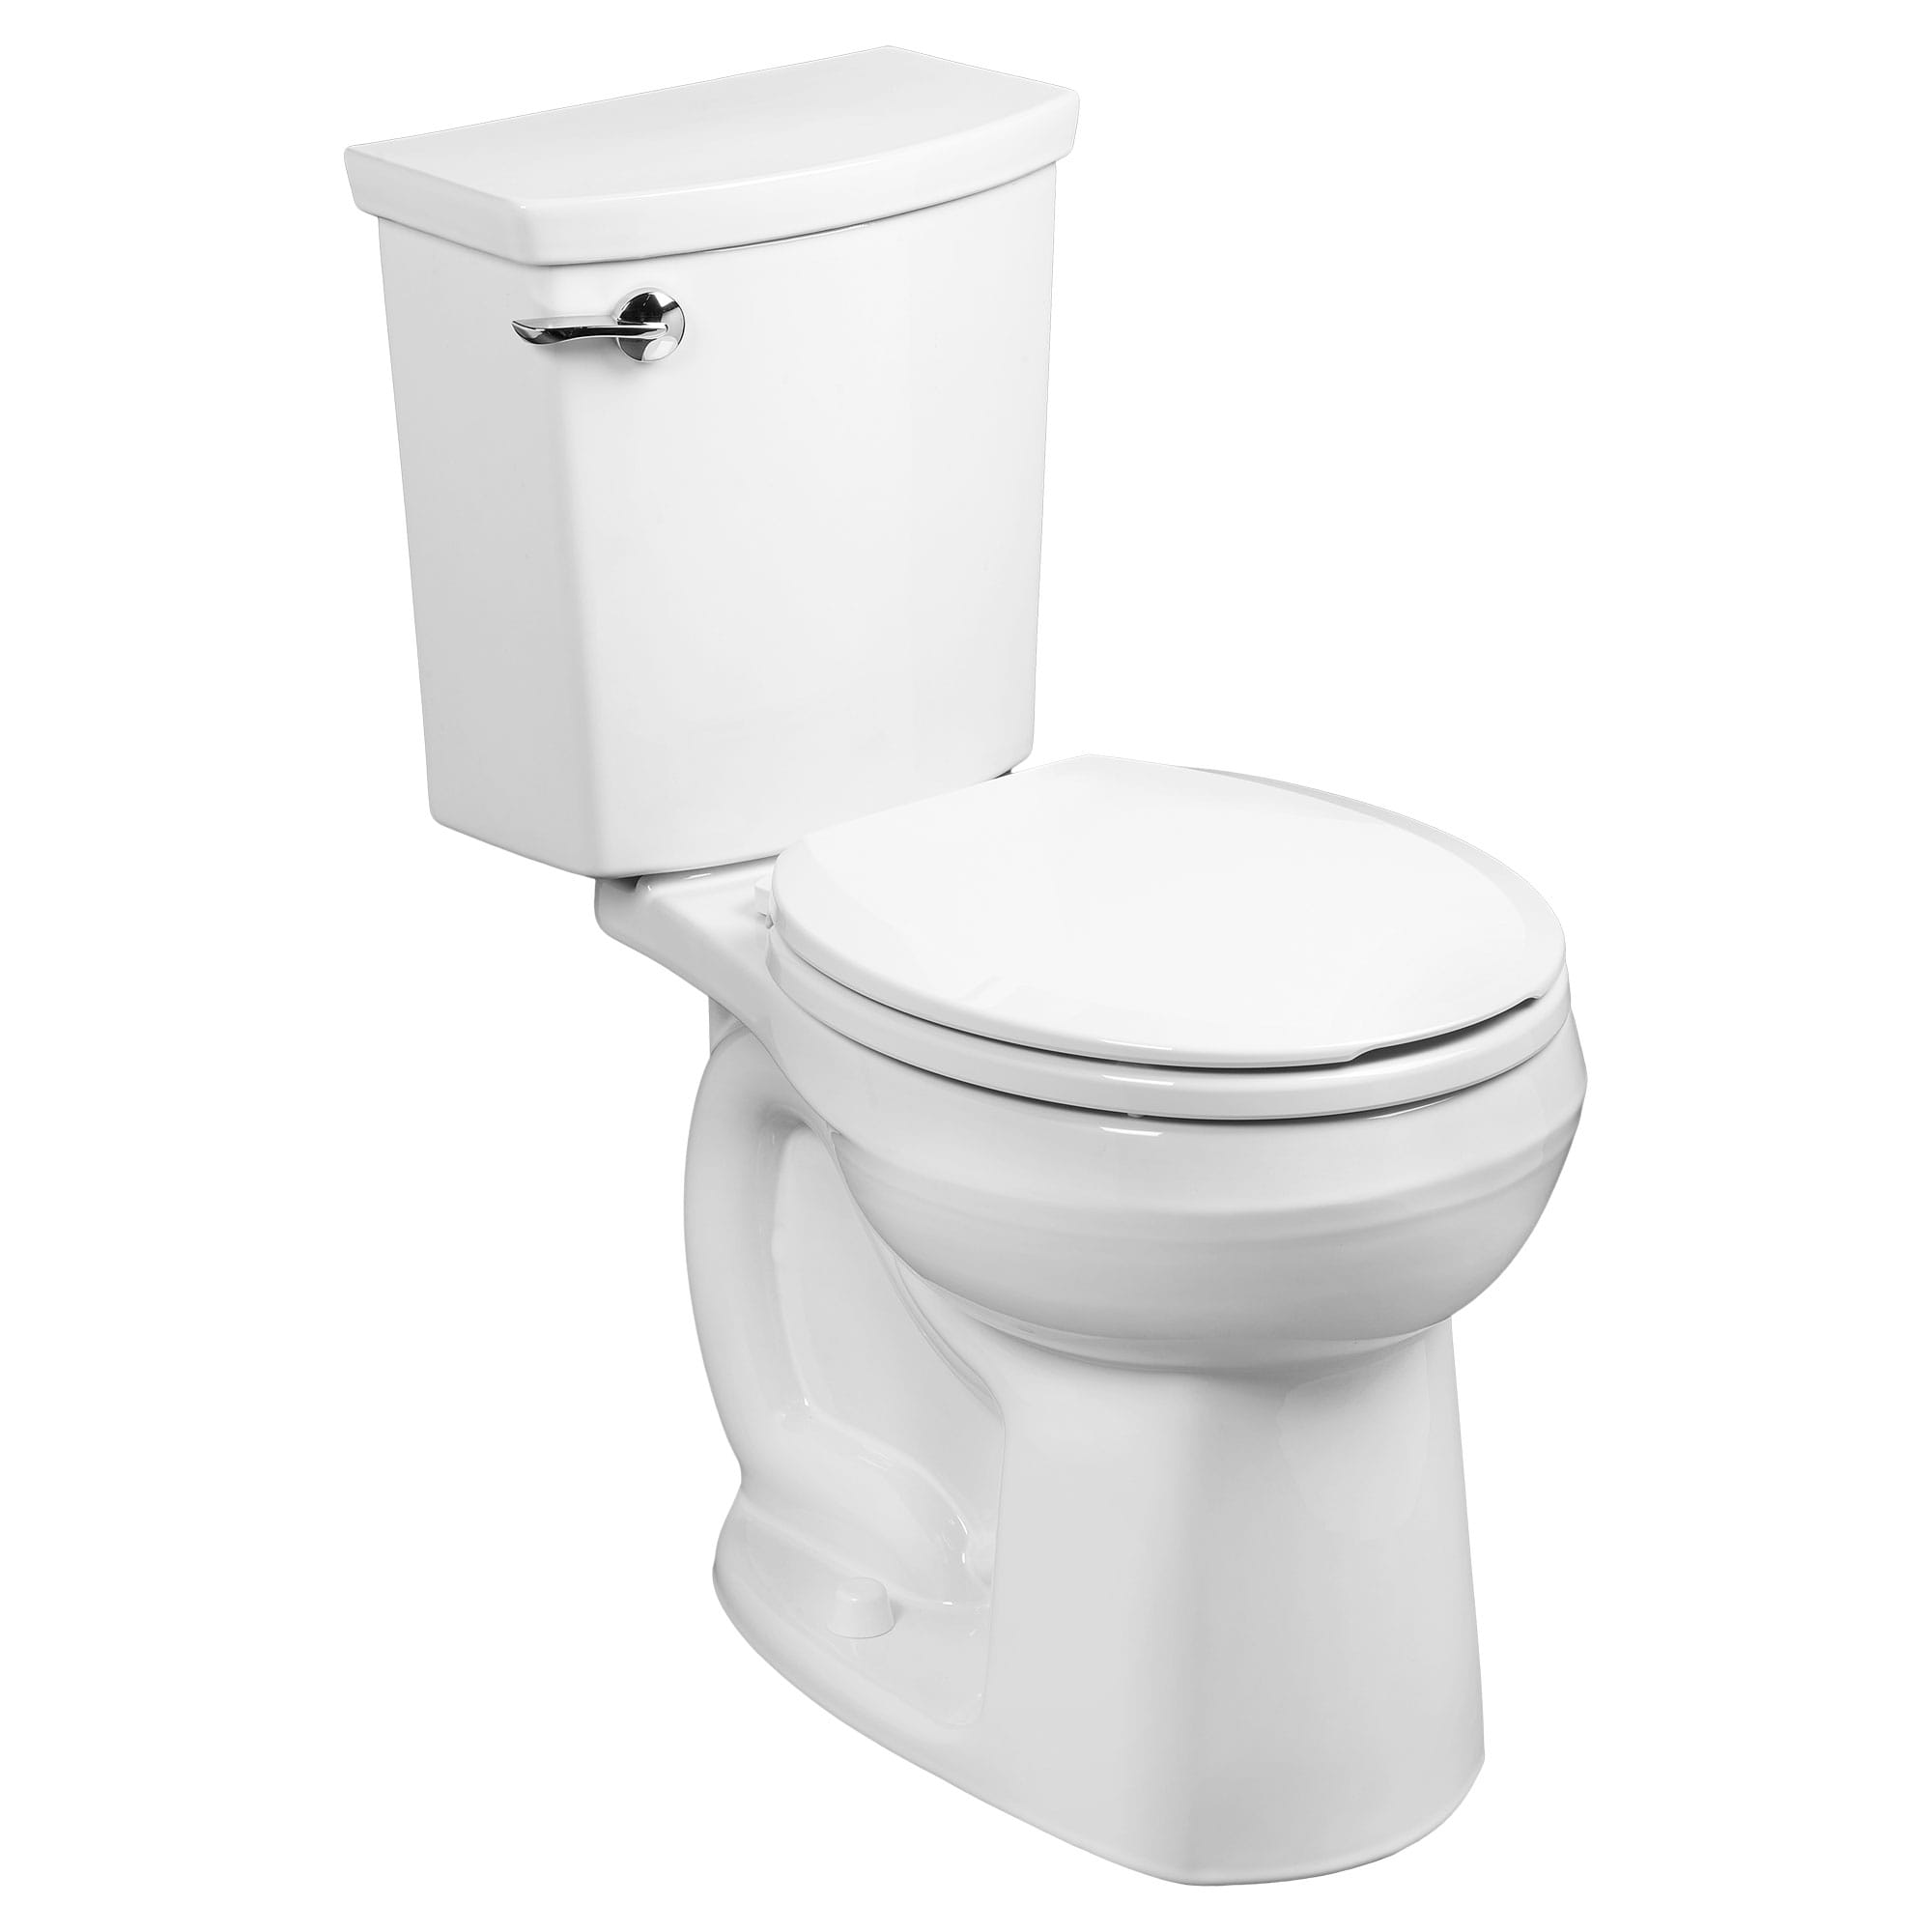 H2Optimum® Two-Piece 1.1 gpf/4.2 Lpf Standard Height Round Front Toilet Less Seat